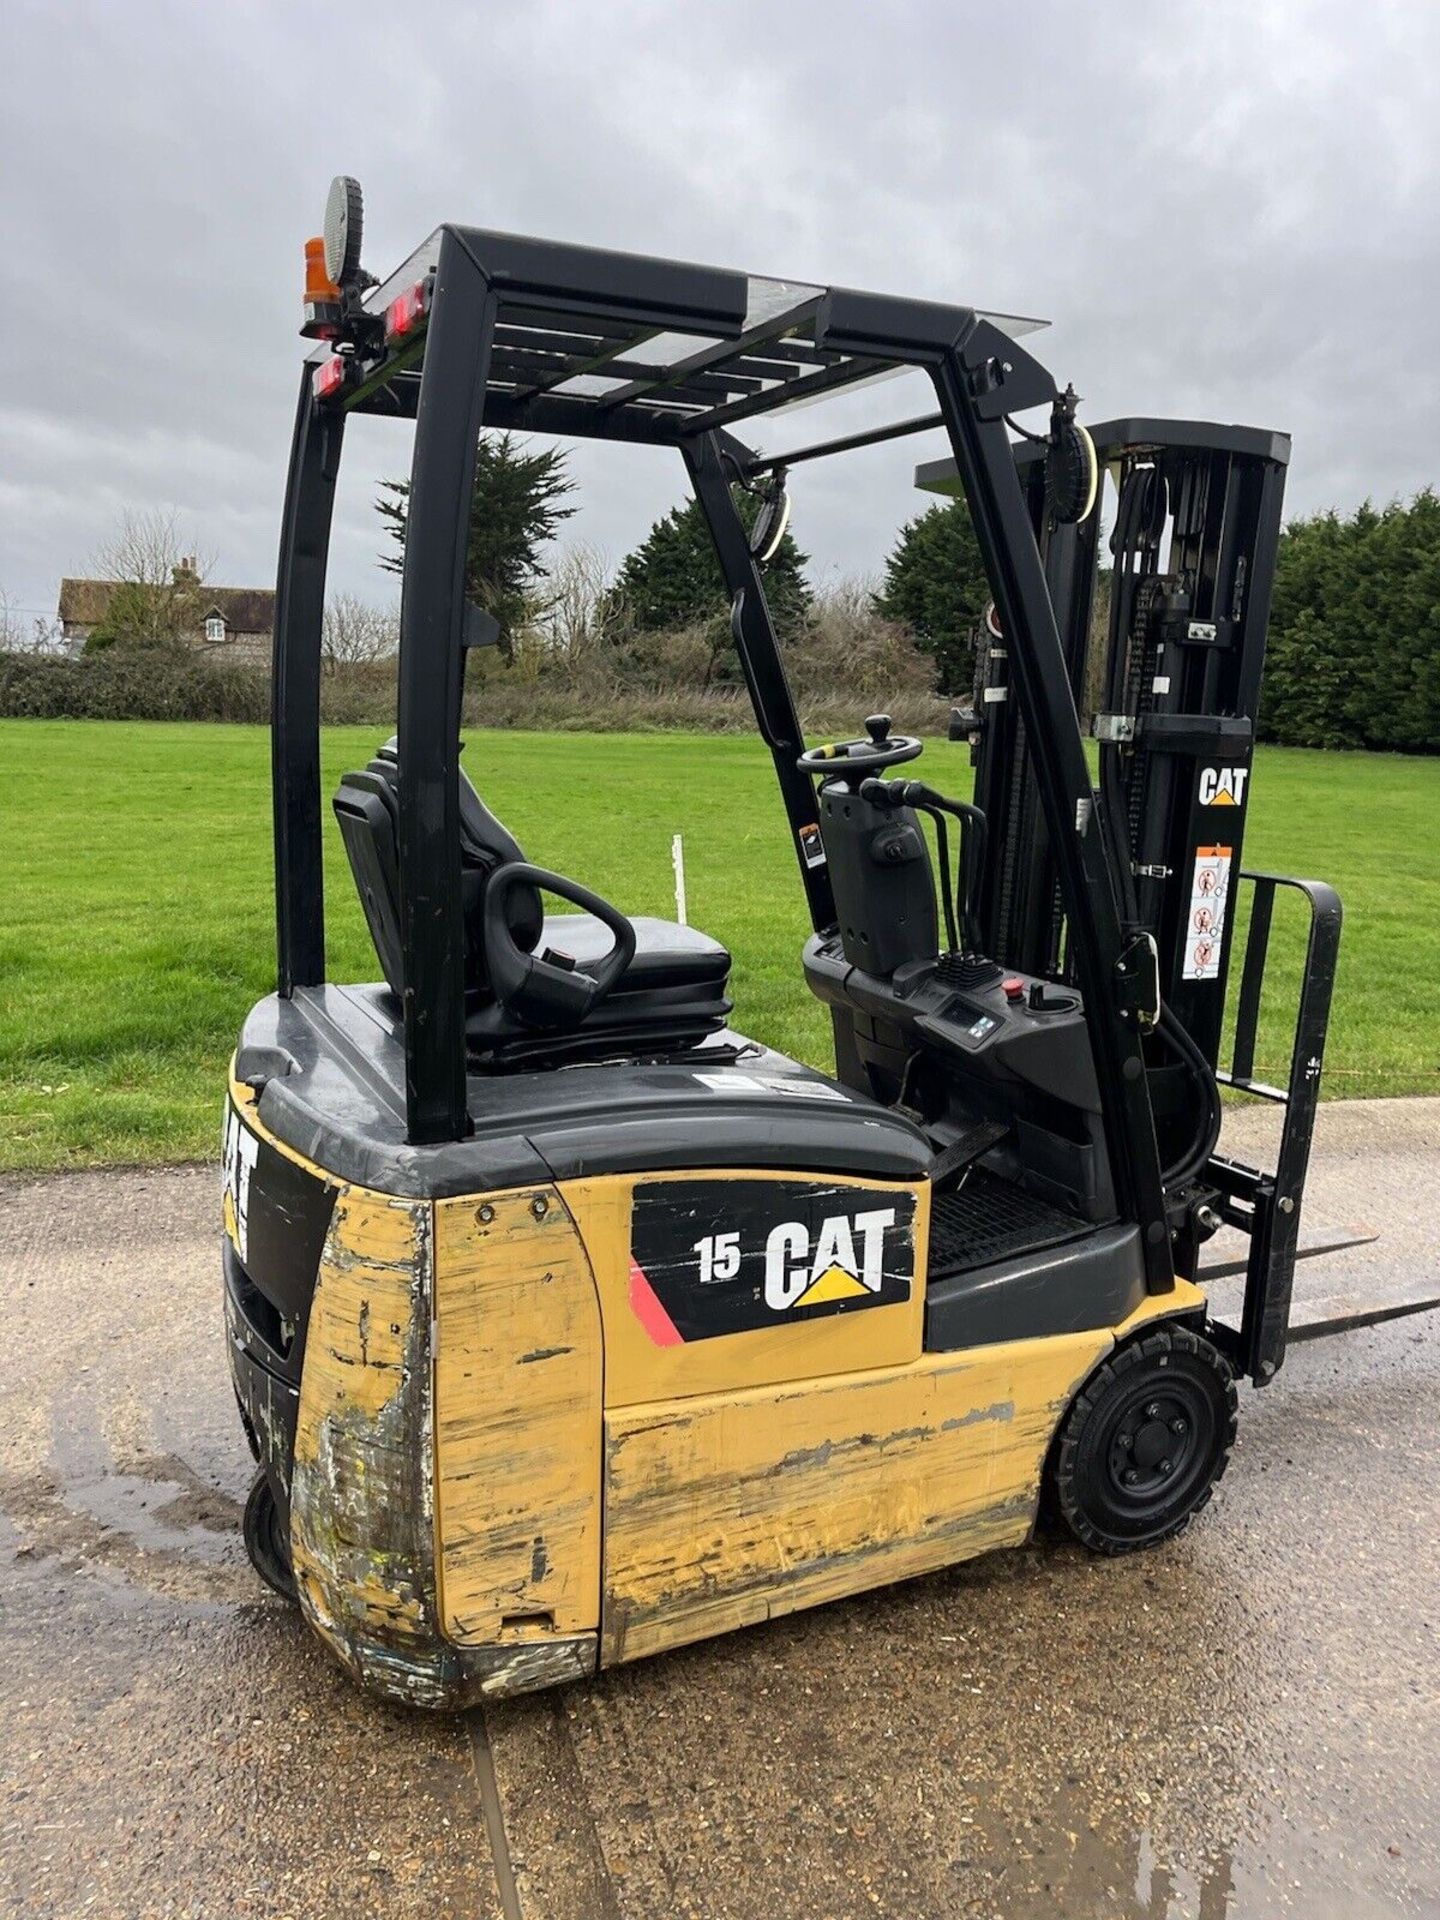 2017, CATERPILLAR 1.5 Electric Forklift Truck (Container Spec) - Image 2 of 6